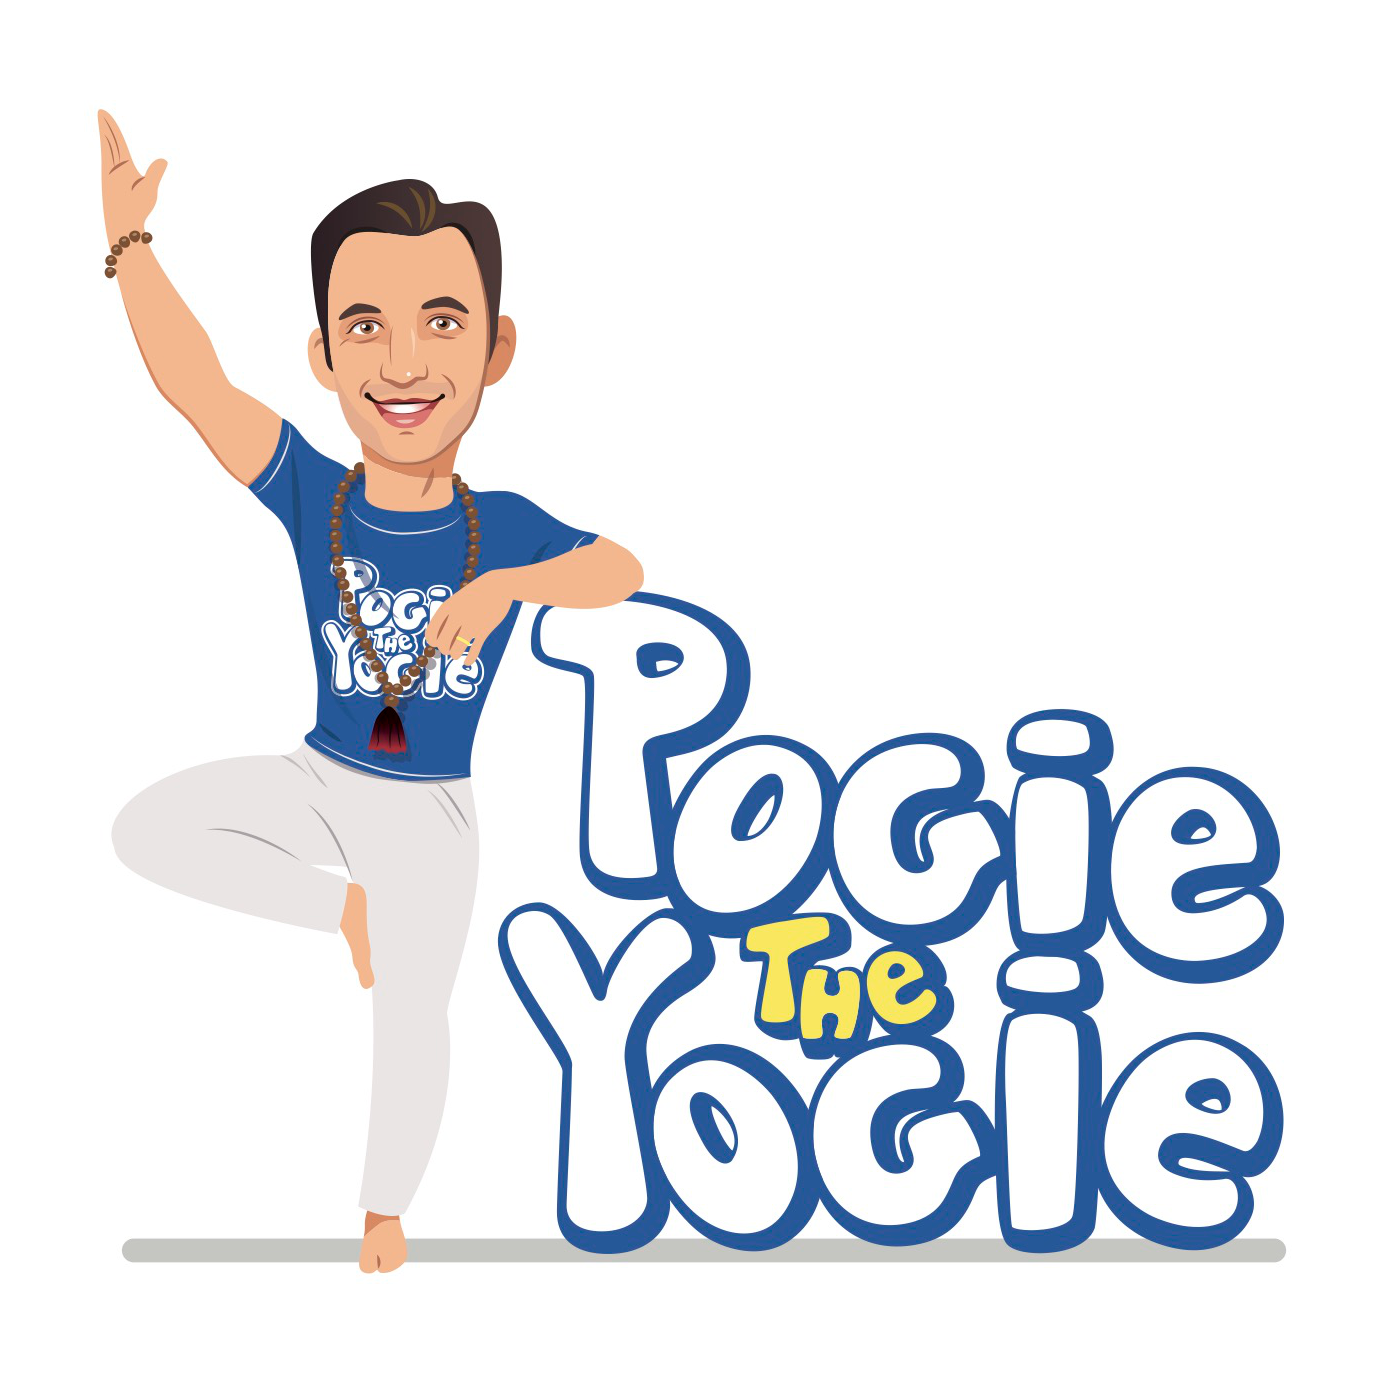 Pogie the Yogie stands on one leg with an arm raised in the air